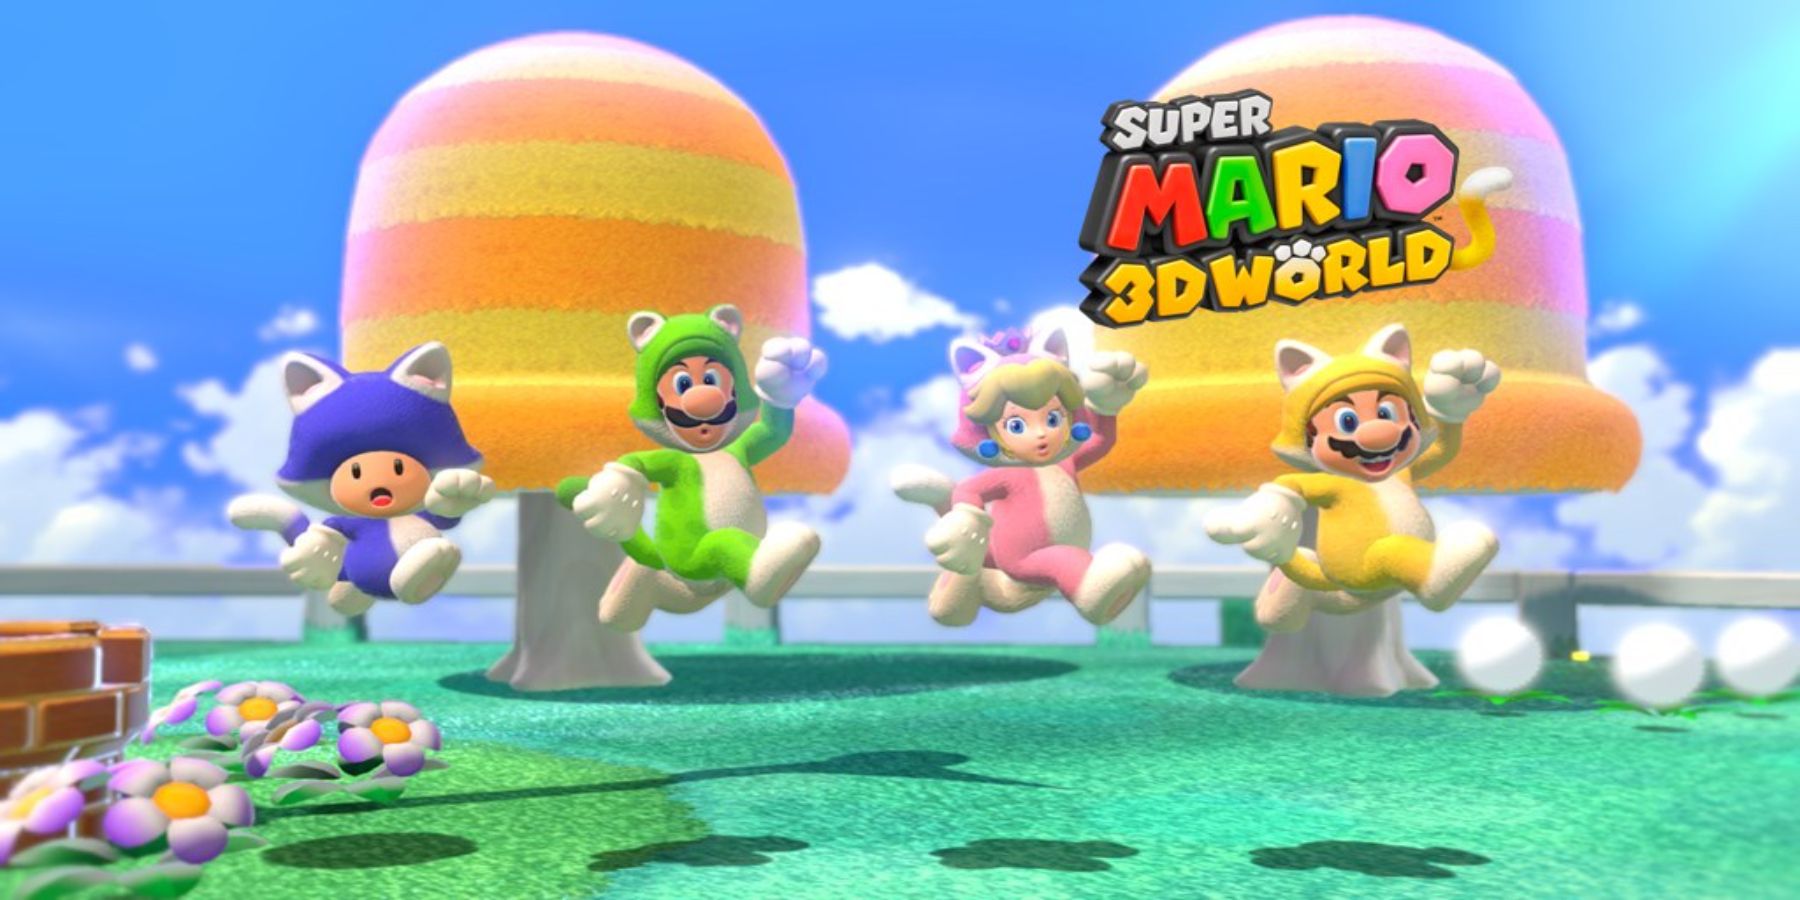 mario 3d world characters jumping cat suit